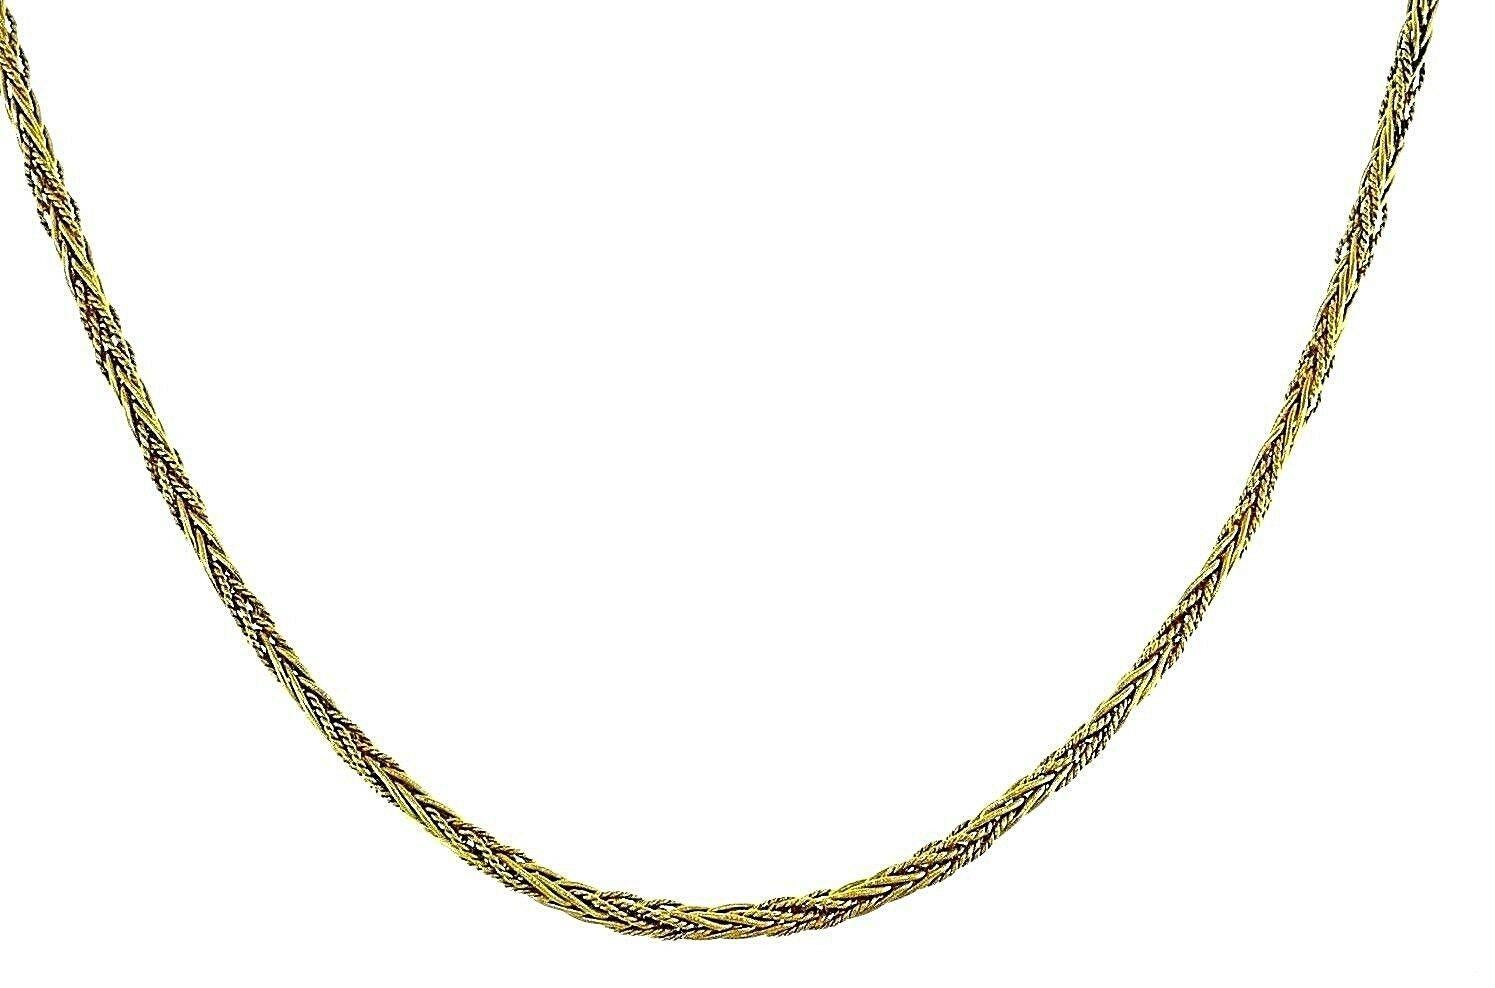 Gorgeous long 18k yellow gold chain necklace by Tiffany & Co. Vintage (c.1970s) wheat link chain, featuring textured and polished gold threads. 
Stamped with Tiffany & Co. maker's mark, a hallmark for 18k gold and a country of origin